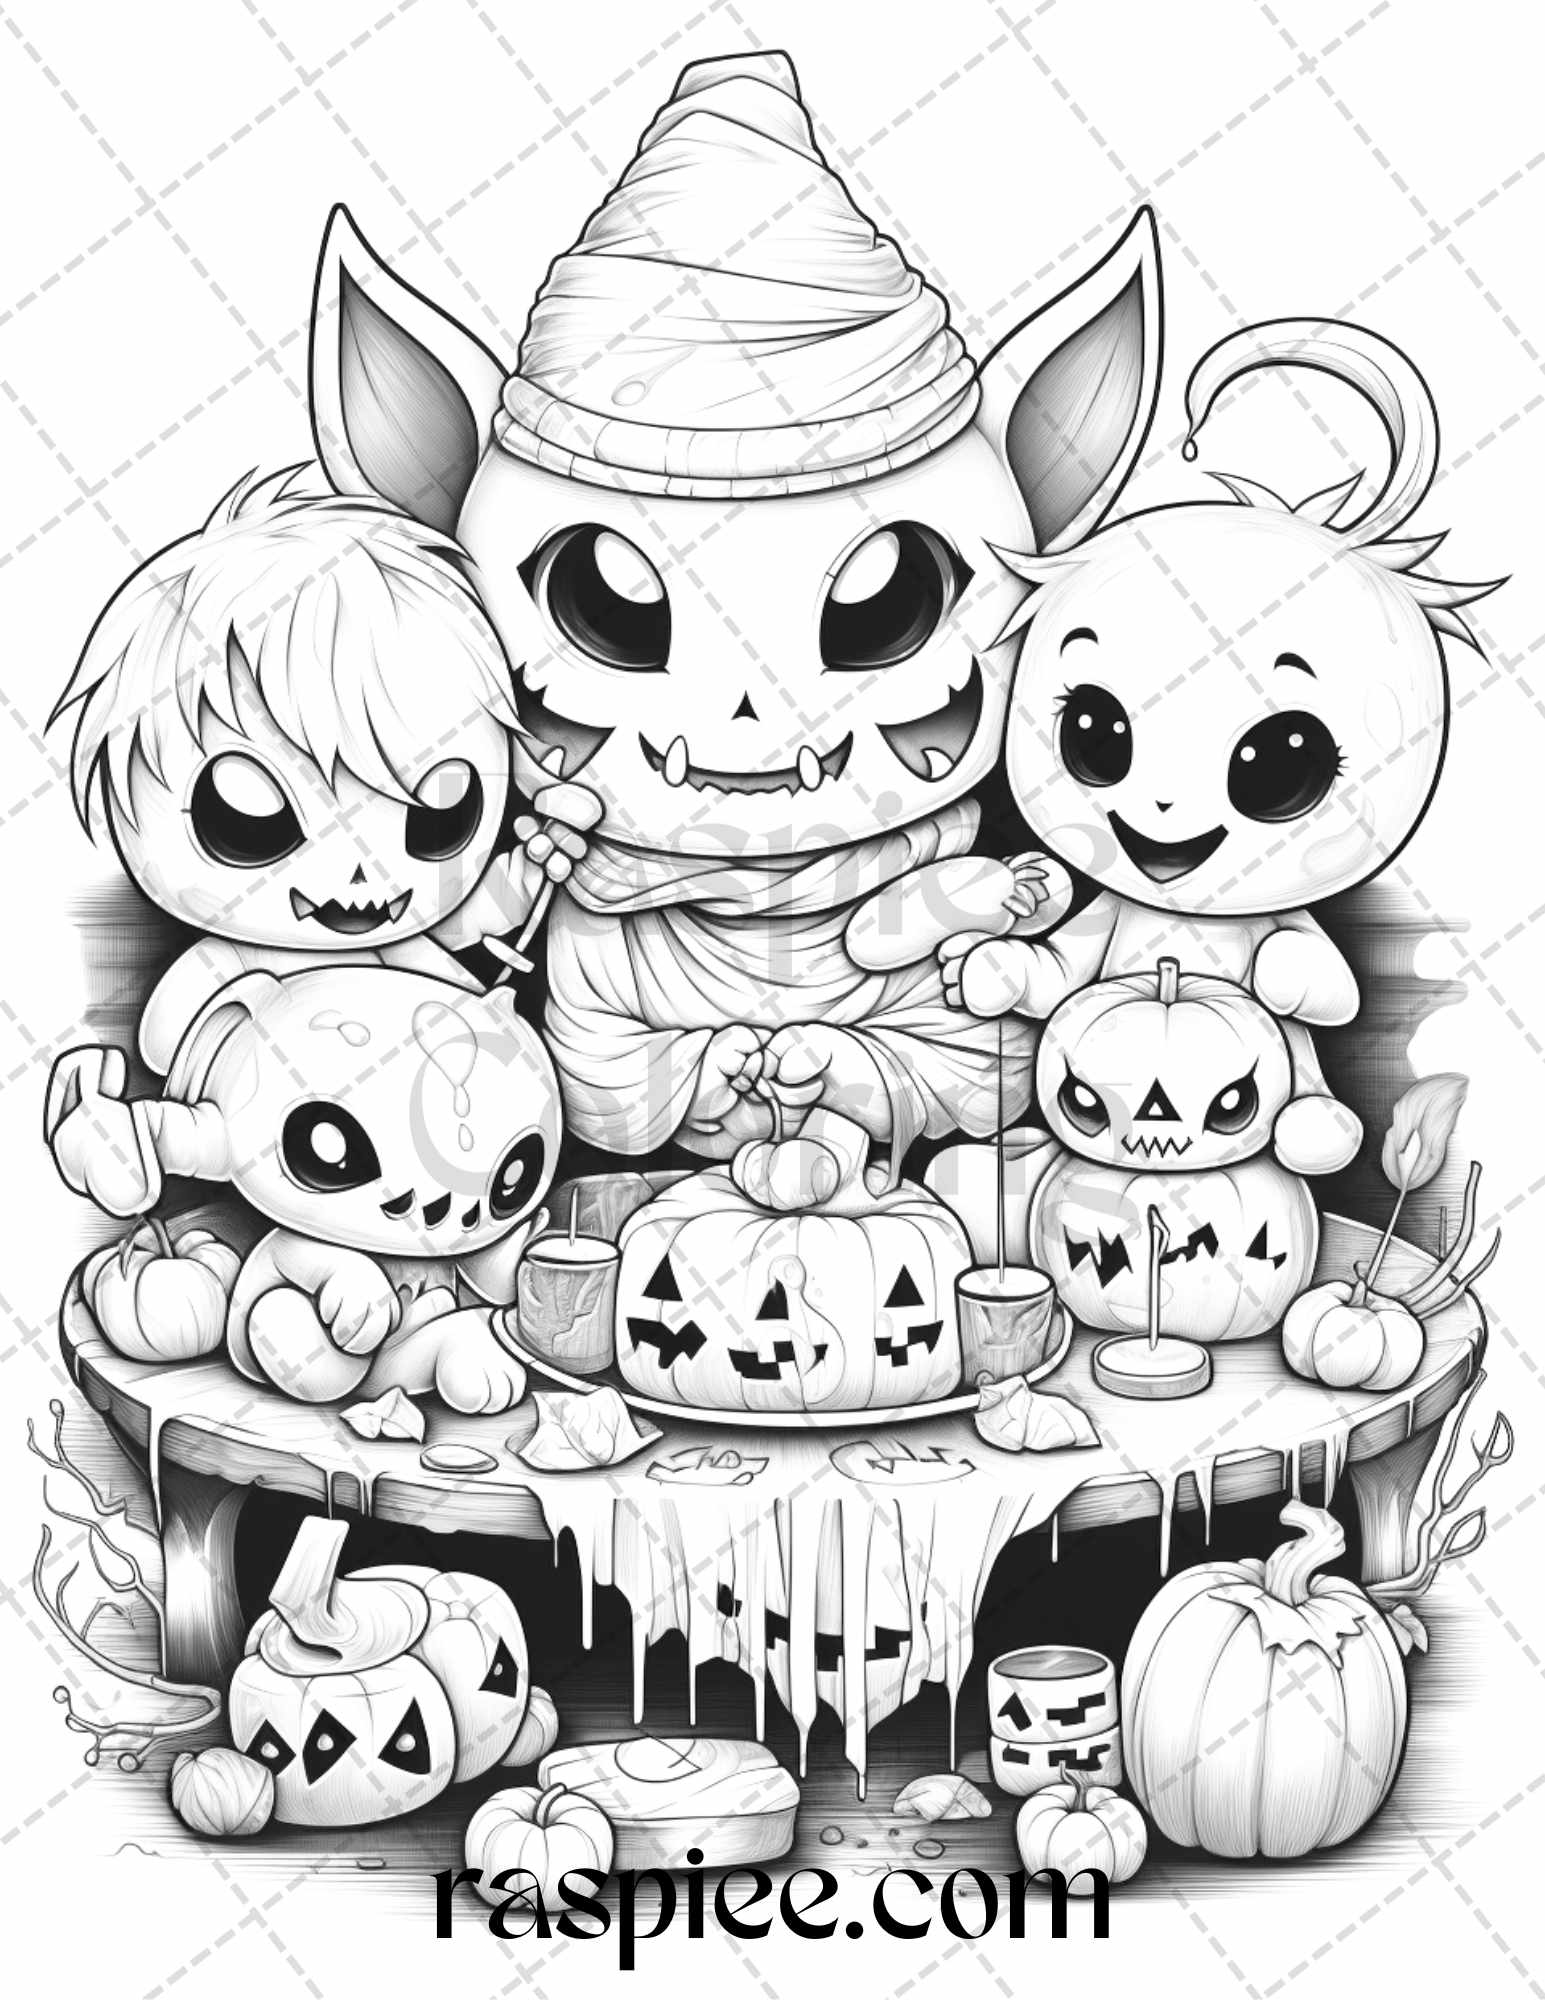 Halloween creepy kawaii grayscale coloring pages for adults and kid â coloring